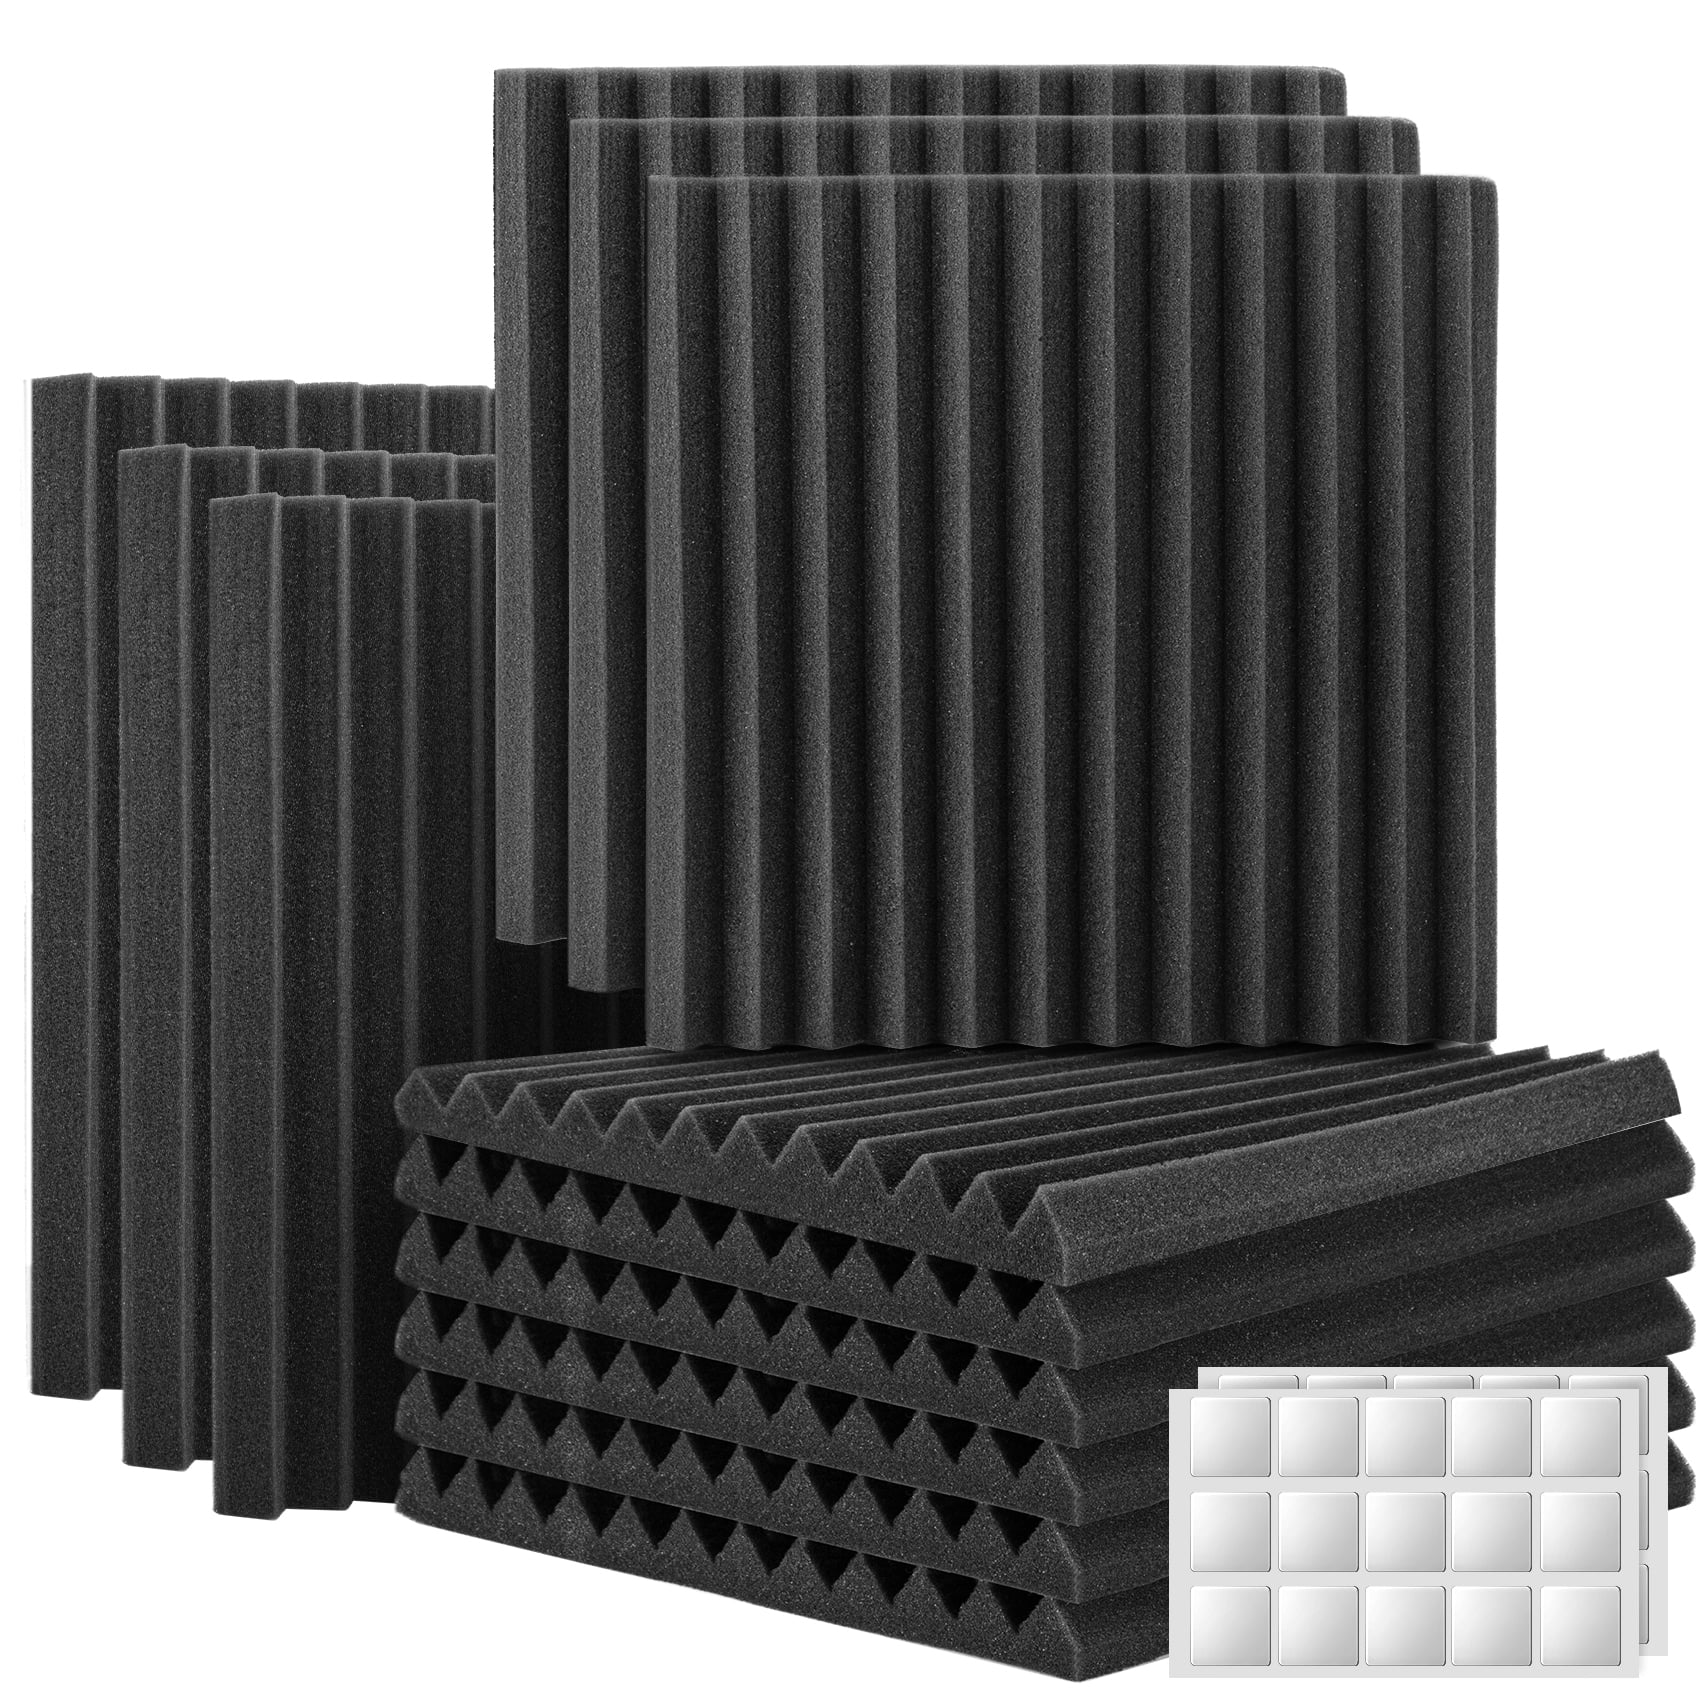 Absorbs Sound and Eliminates Echoes Pyramid Design Acoustic Foam Fast Expand Upgraded 12 Pack Self-adhesive Sound Proof Foam Panels 2 X 12 X 12 Acoustic Panels with High Density 